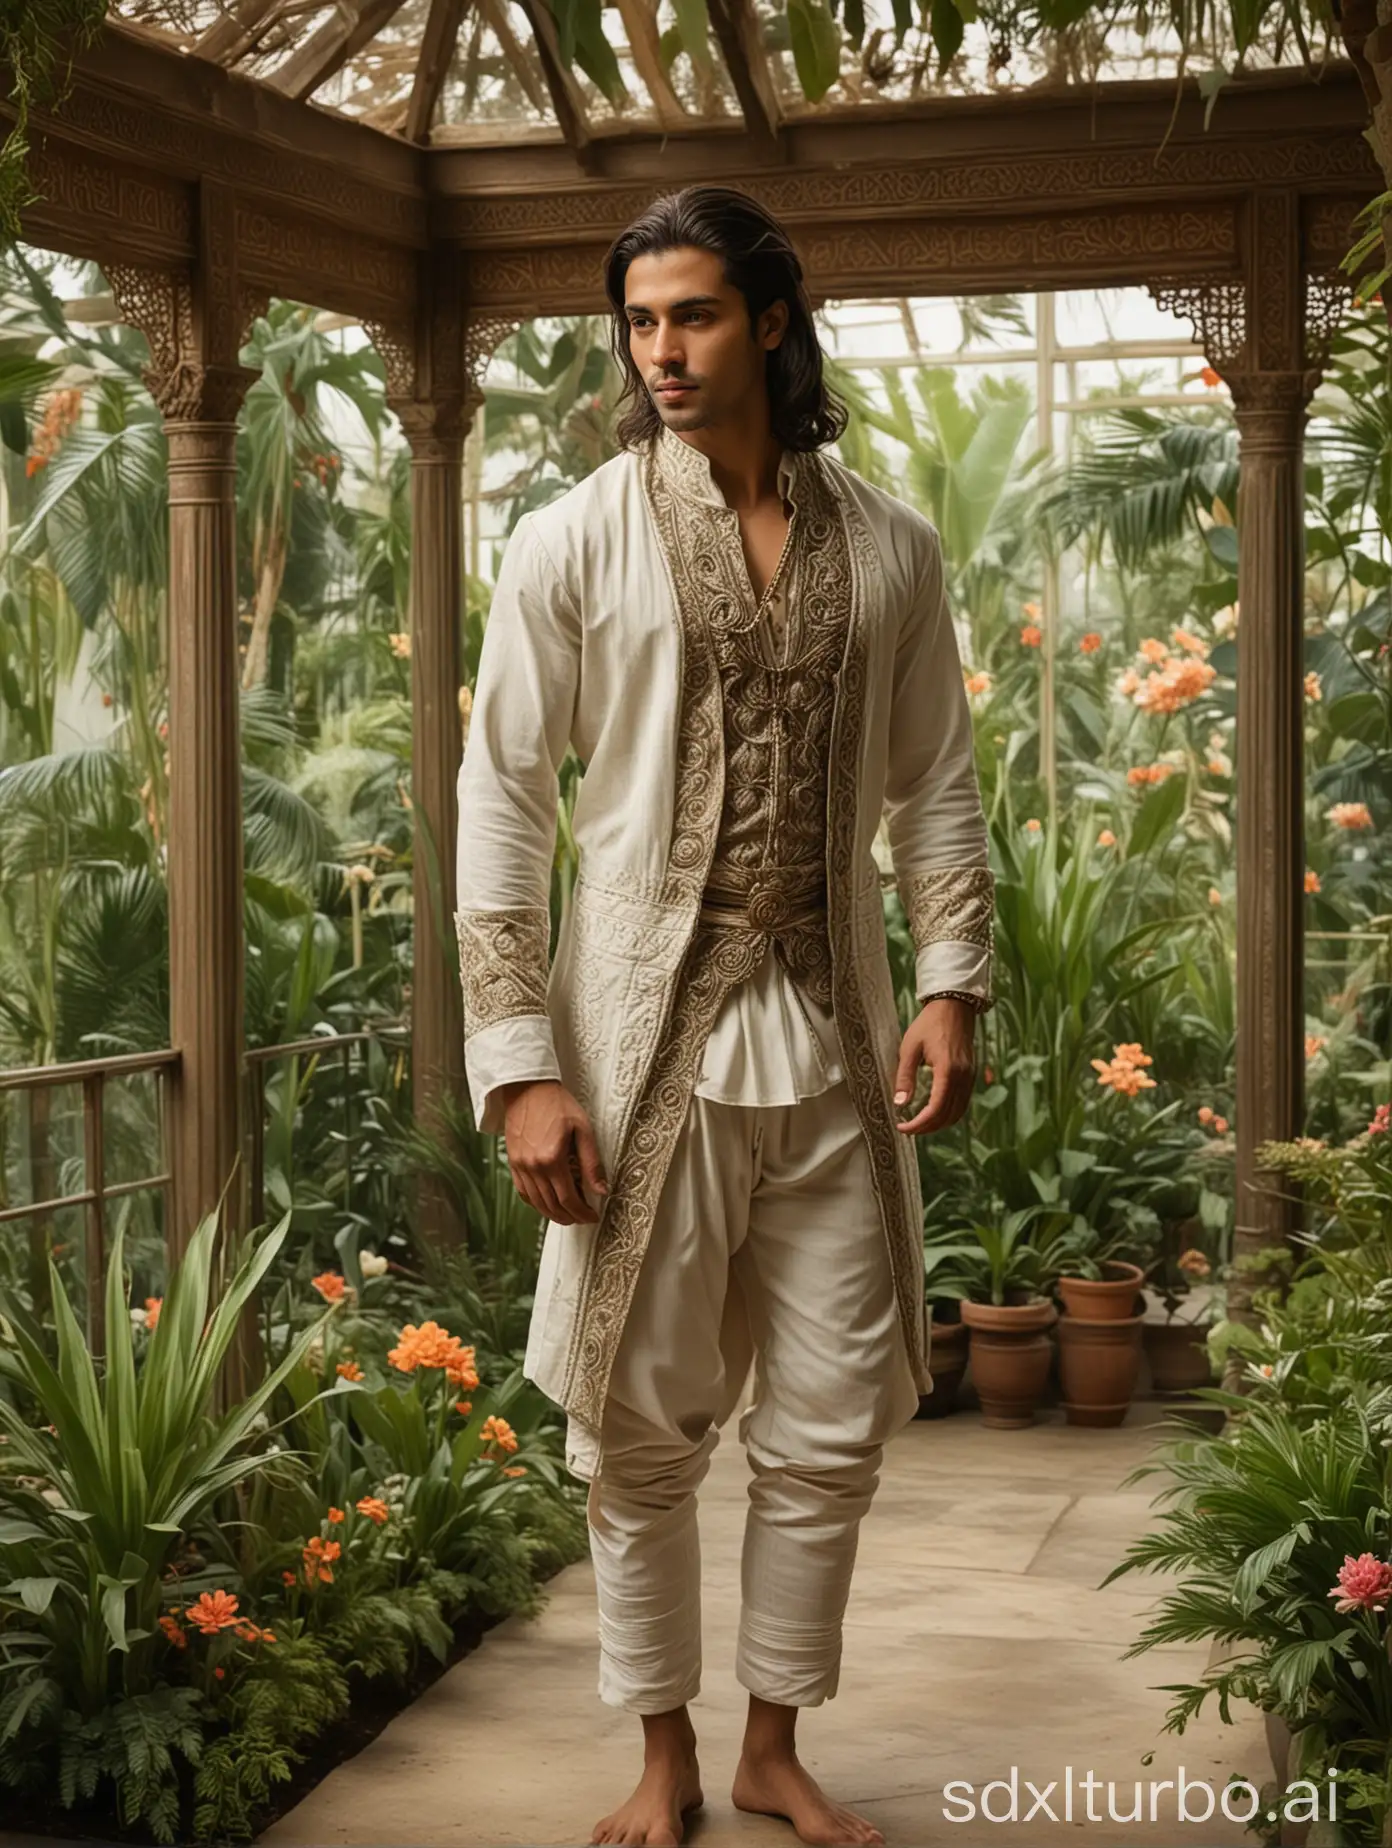 A full-body shot of a handsome, tall, and muscular Arabic-Bali descent guy with shoulder-length hair in a traditional-hunter costume, with a background of a glasshouse garden room in the style of painting by Leyendecker.